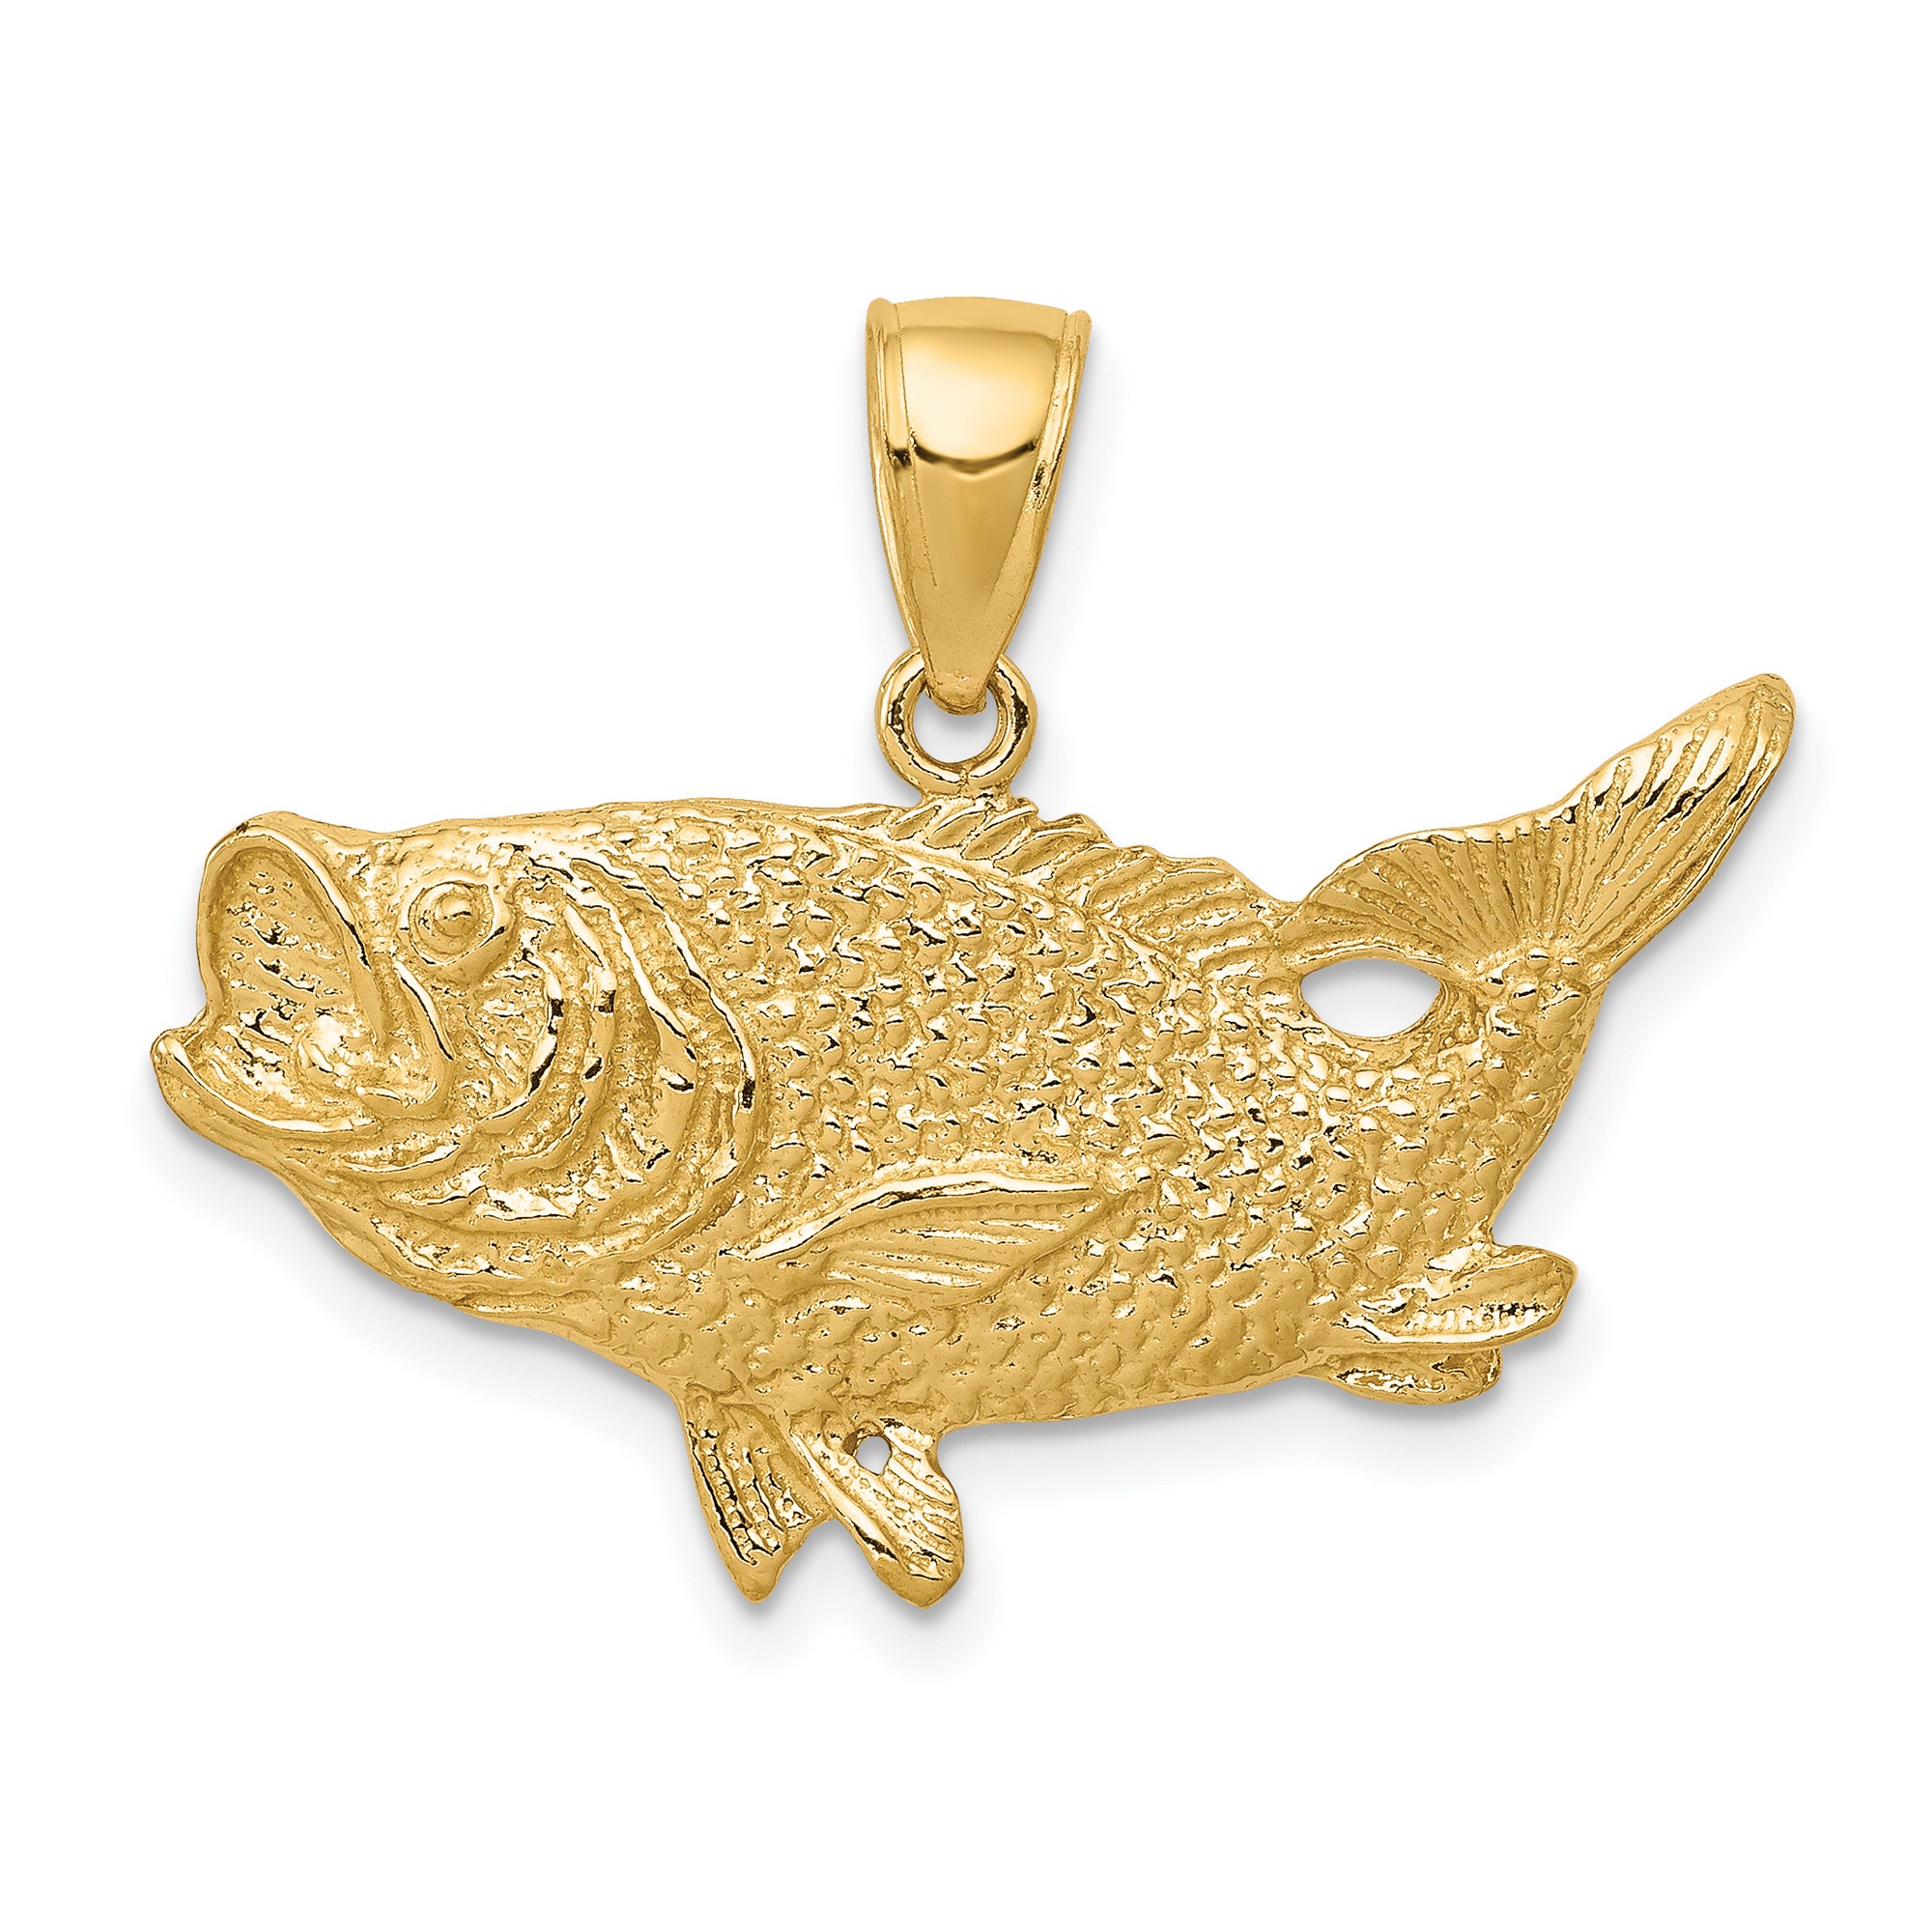 Pre-owned Jewelry Stores Network 14k Yellow Gold Solid Open-back Largemouth Bass Fish Charm Pendant